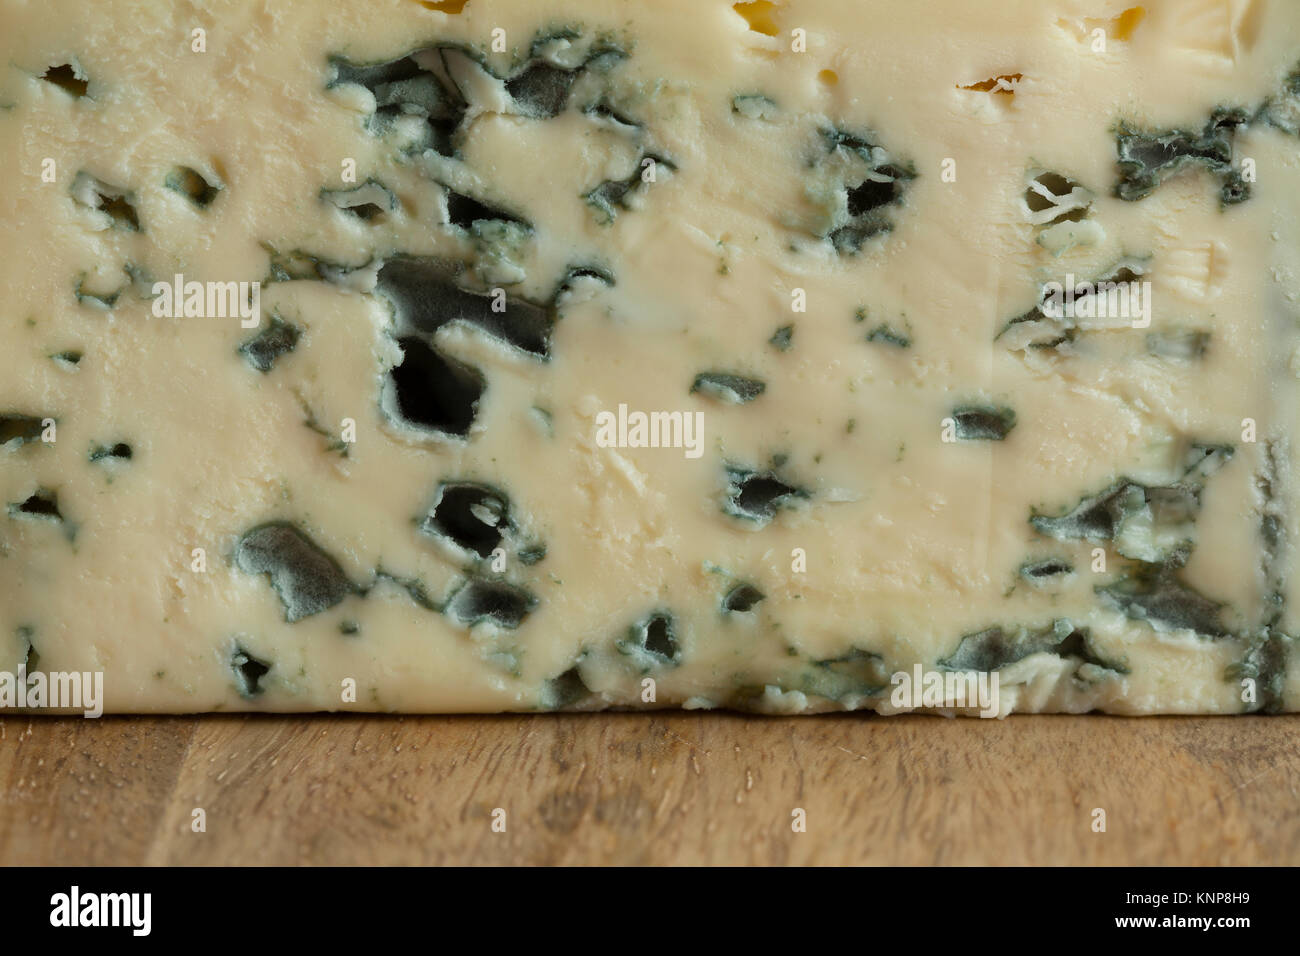 Piece of French Bleu d'auvergne cheese close up Stock Photo